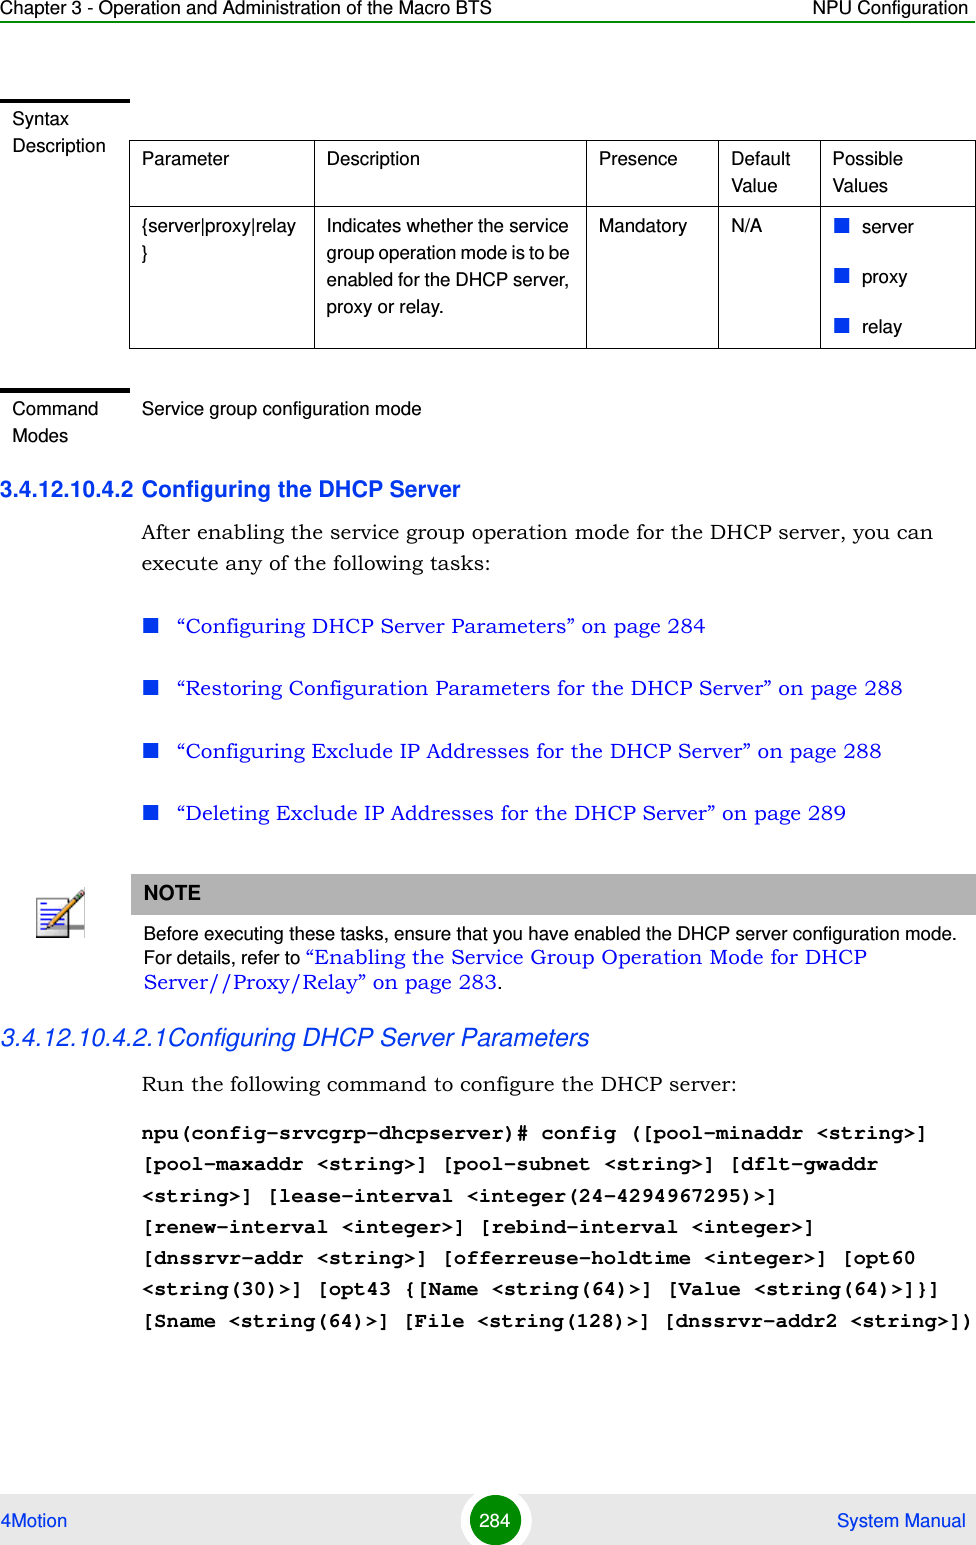 Chapter 3 - Operation and Administration of the Macro BTS NPU Configuration4Motion 284  System Manual3.4.12.10.4.2 Configuring the DHCP ServerAfter enabling the service group operation mode for the DHCP server, you can execute any of the following tasks:“Configuring DHCP Server Parameters” on page 284“Restoring Configuration Parameters for the DHCP Server” on page 288“Configuring Exclude IP Addresses for the DHCP Server” on page 288“Deleting Exclude IP Addresses for the DHCP Server” on page 2893.4.12.10.4.2.1Configuring DHCP Server ParametersRun the following command to configure the DHCP server:npu(config-srvcgrp-dhcpserver)# config ([pool-minaddr &lt;string&gt;] [pool-maxaddr &lt;string&gt;] [pool-subnet &lt;string&gt;] [dflt-gwaddr &lt;string&gt;] [lease-interval &lt;integer(24-4294967295)&gt;] [renew-interval &lt;integer&gt;] [rebind-interval &lt;integer&gt;] [dnssrvr-addr &lt;string&gt;] [offerreuse-holdtime &lt;integer&gt;] [opt60 &lt;string(30)&gt;] [opt43 {[Name &lt;string(64)&gt;] [Value &lt;string(64)&gt;]}] [Sname &lt;string(64)&gt;] [File &lt;string(128)&gt;] [dnssrvr-addr2 &lt;string&gt;])Syntax Description Parameter Description Presence Default ValuePossible Values{server|proxy|relay}Indicates whether the service group operation mode is to be enabled for the DHCP server, proxy or relay.Mandatory N/A serverproxyrelayCommand ModesService group configuration modeNOTEBefore executing these tasks, ensure that you have enabled the DHCP server configuration mode. For details, refer to “Enabling the Service Group Operation Mode for DHCP Server//Proxy/Relay” on page 283.